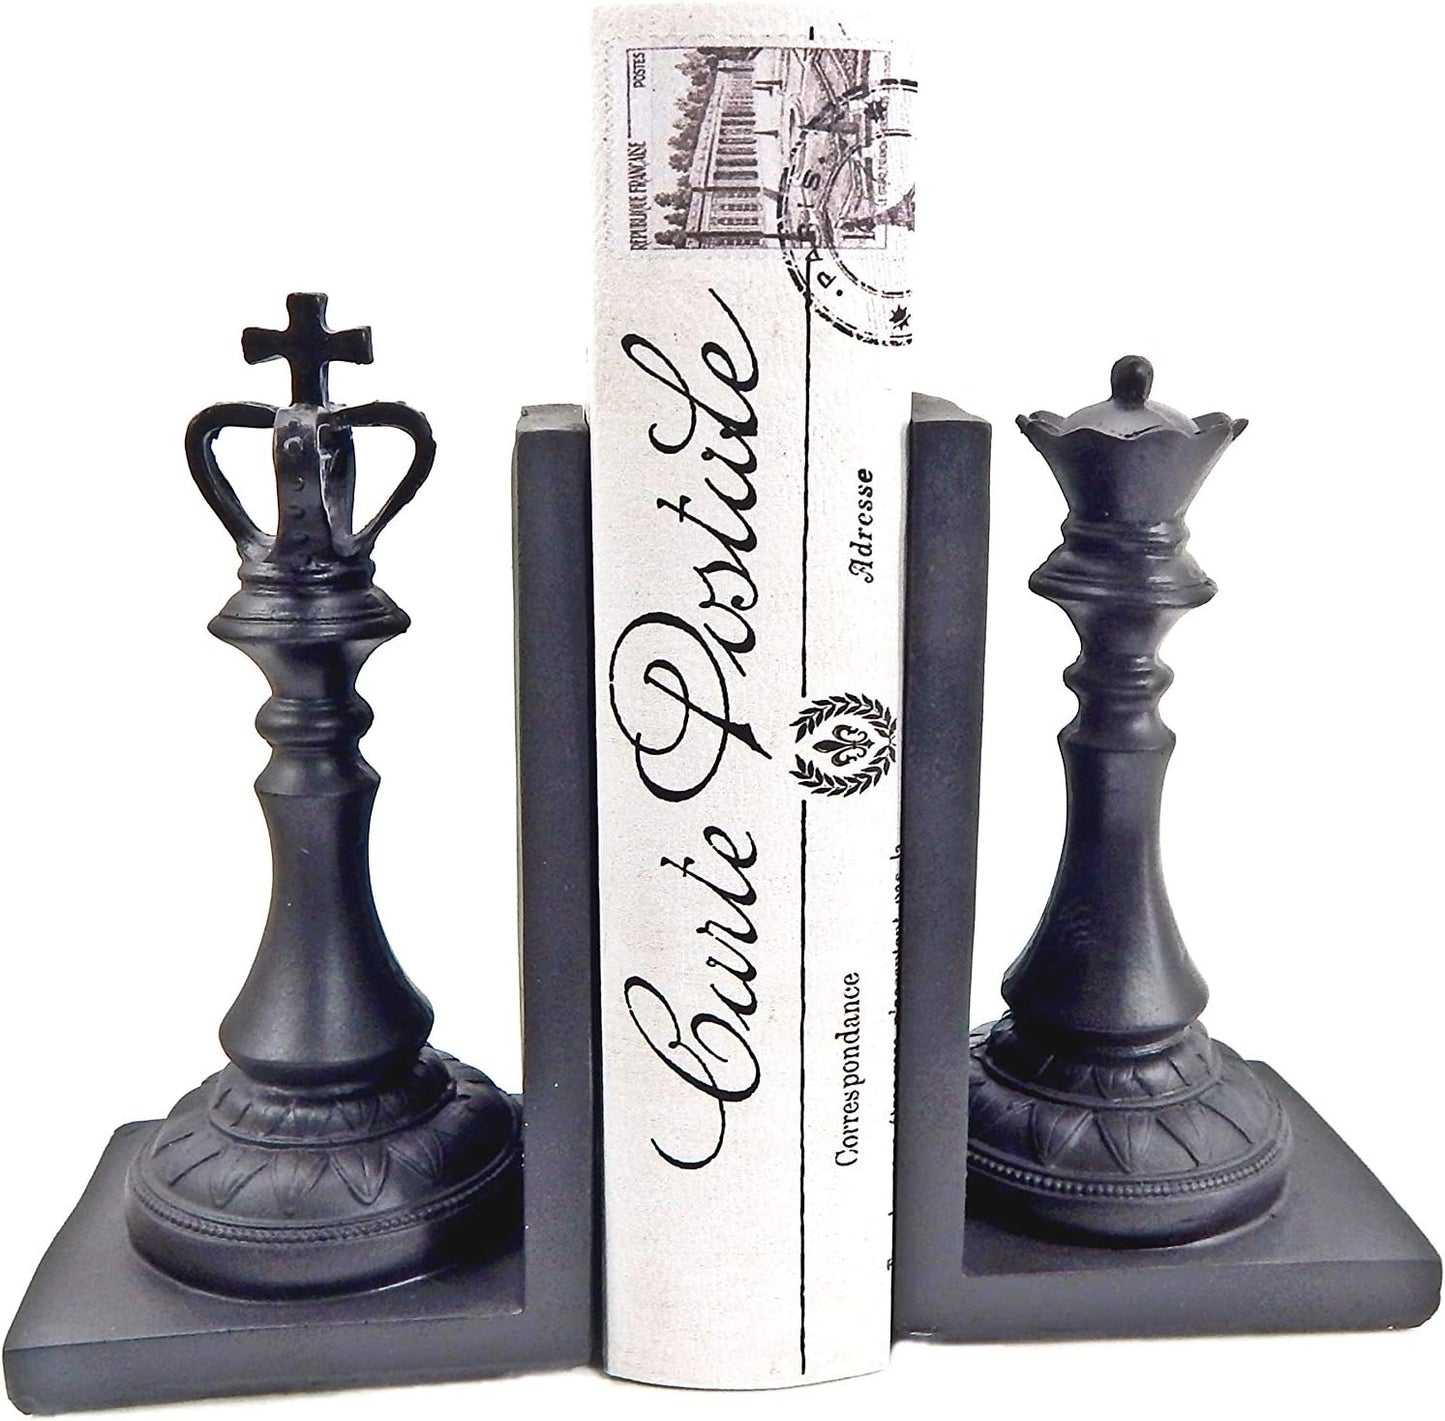 29745 Chess King and Queen Decorative Bookend Royal Exquisite Vintage Retro Book Ends Shelf Organizers Books Stopper Black Statues Sculpture 7 Inch